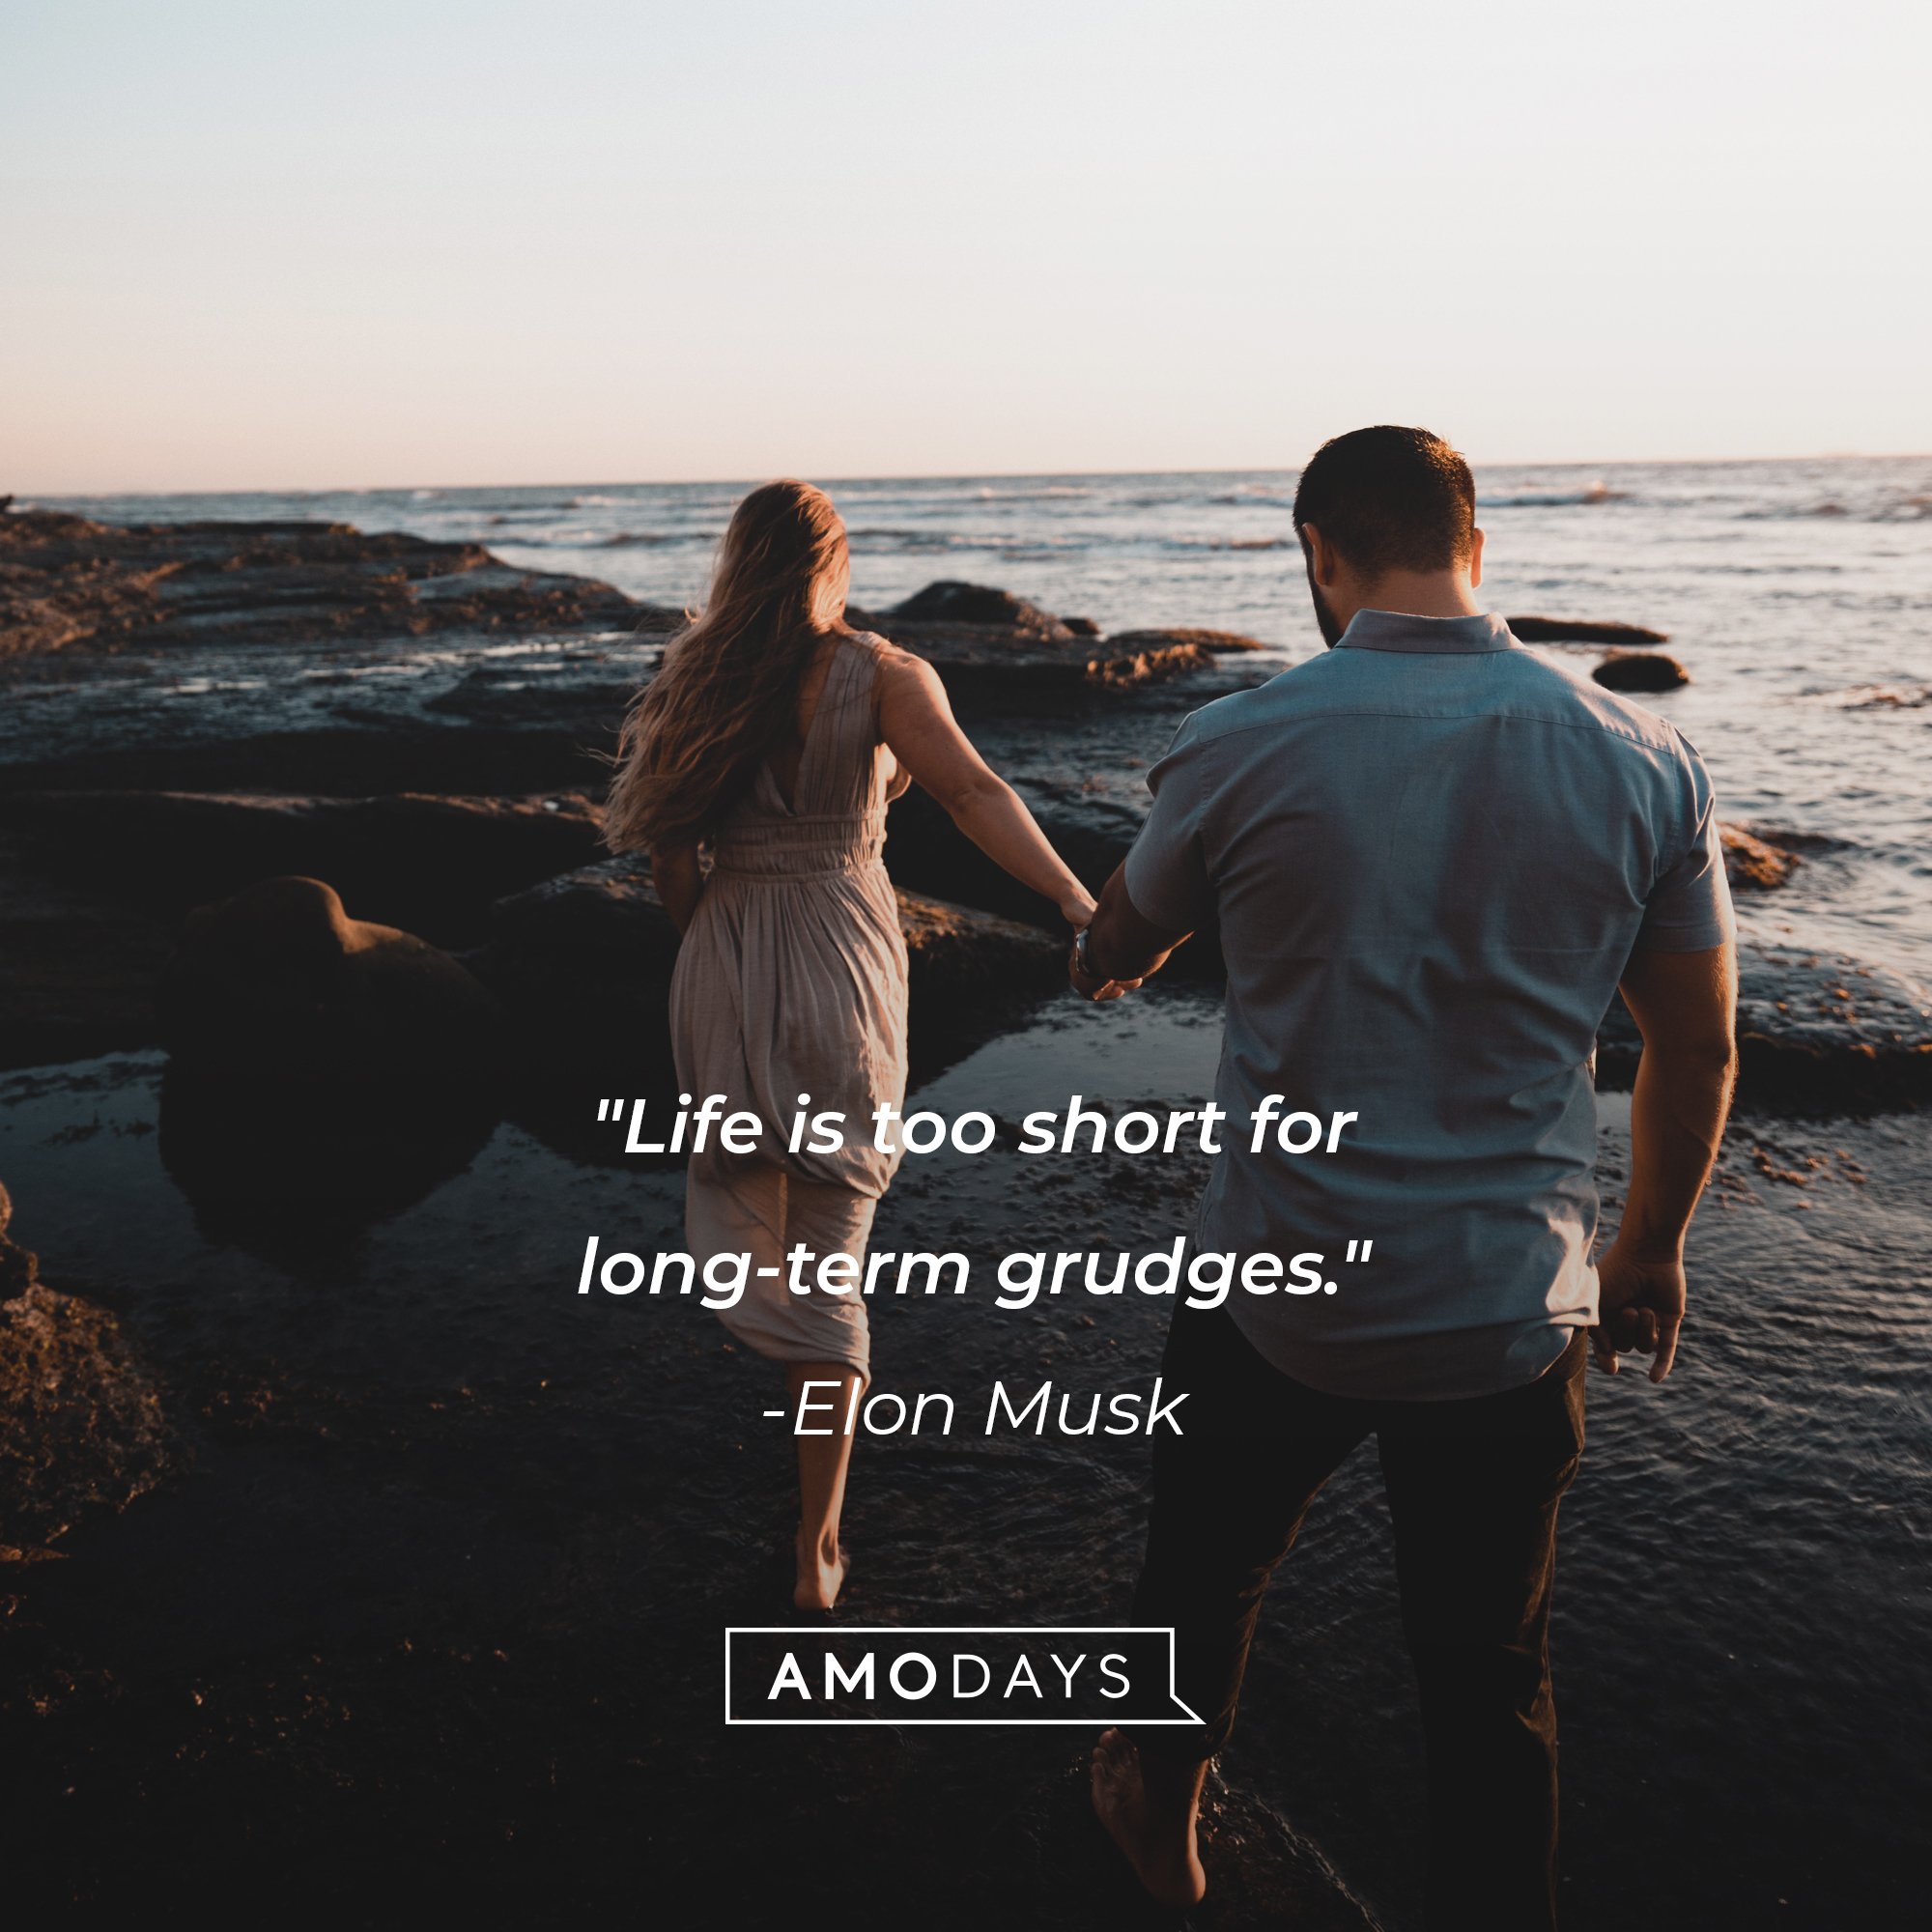 Elon Musk’s quote: "Life is too short for long-term grudges." | Image: AmoDays    